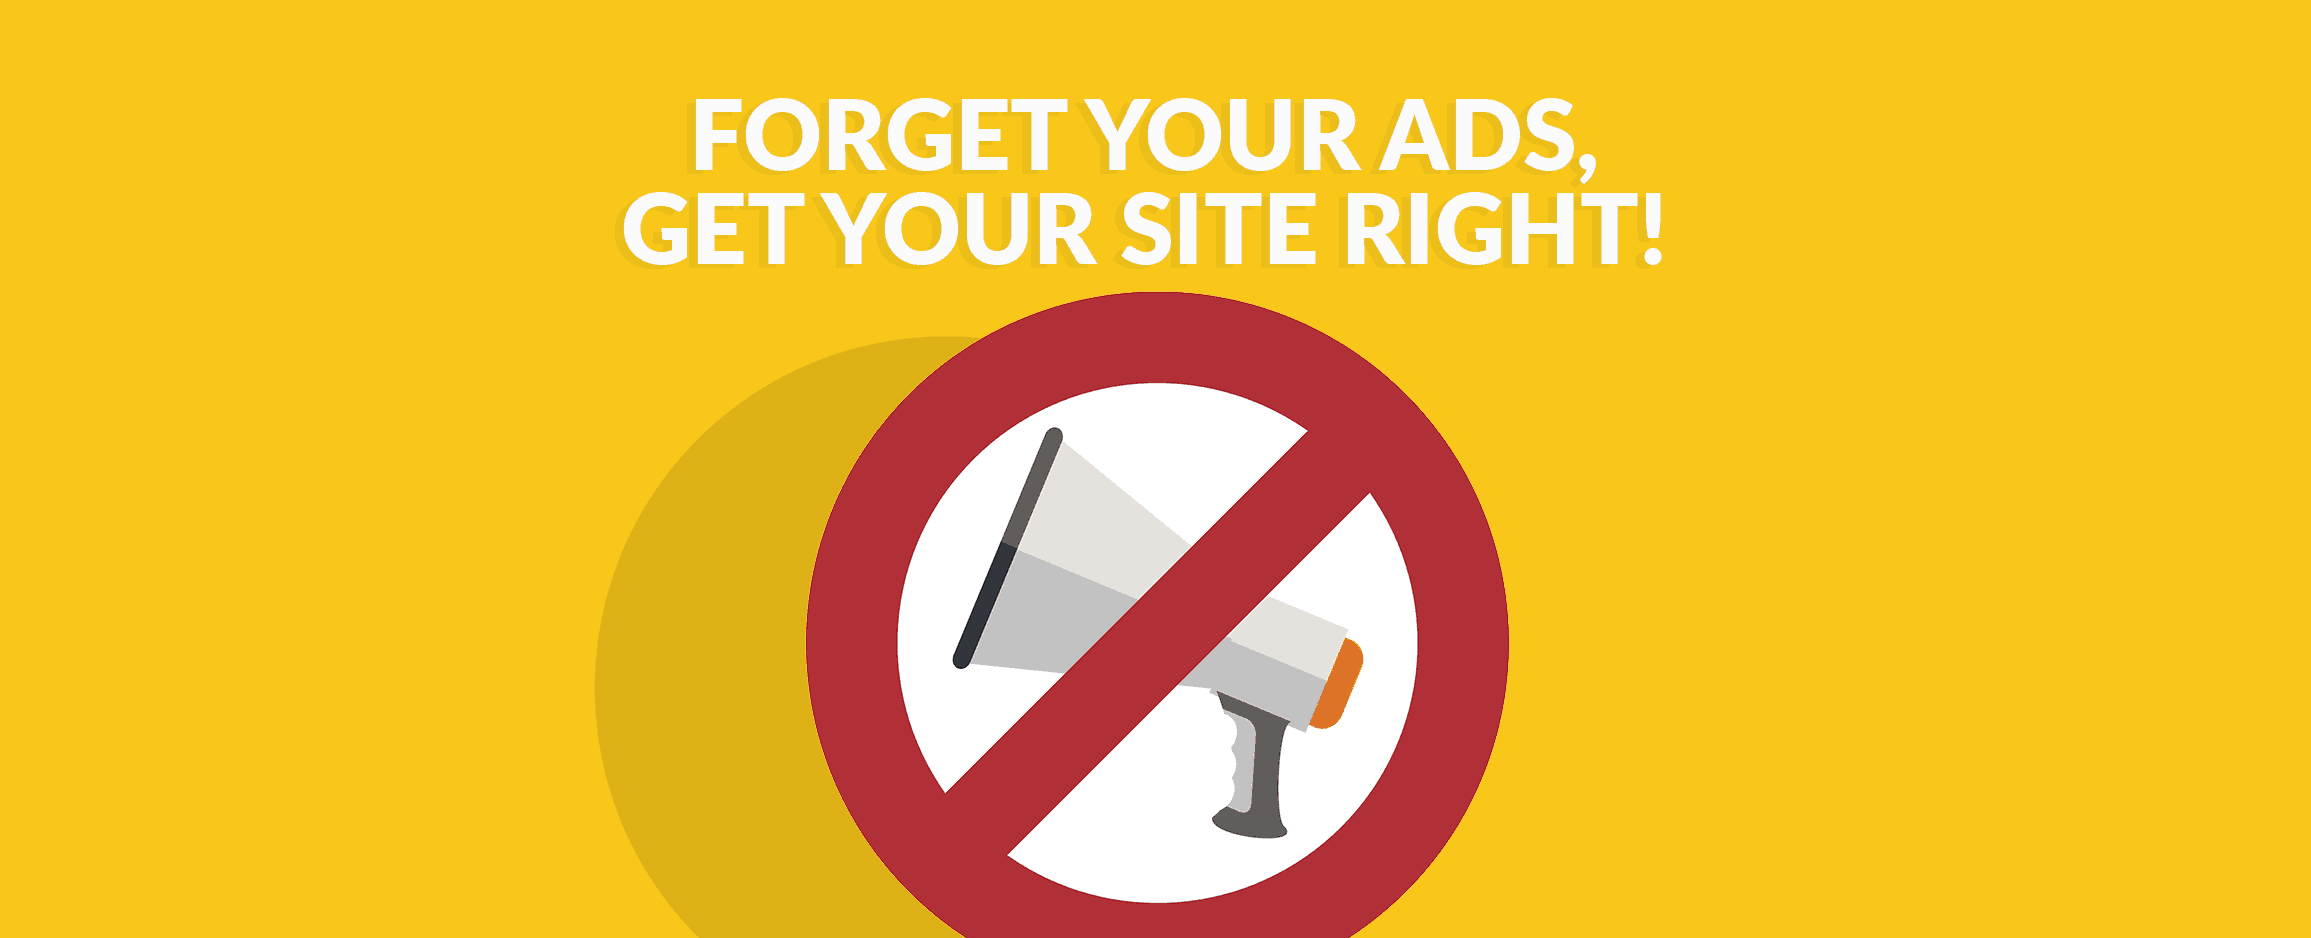 Forget Your Ads, Get Your Site Right!